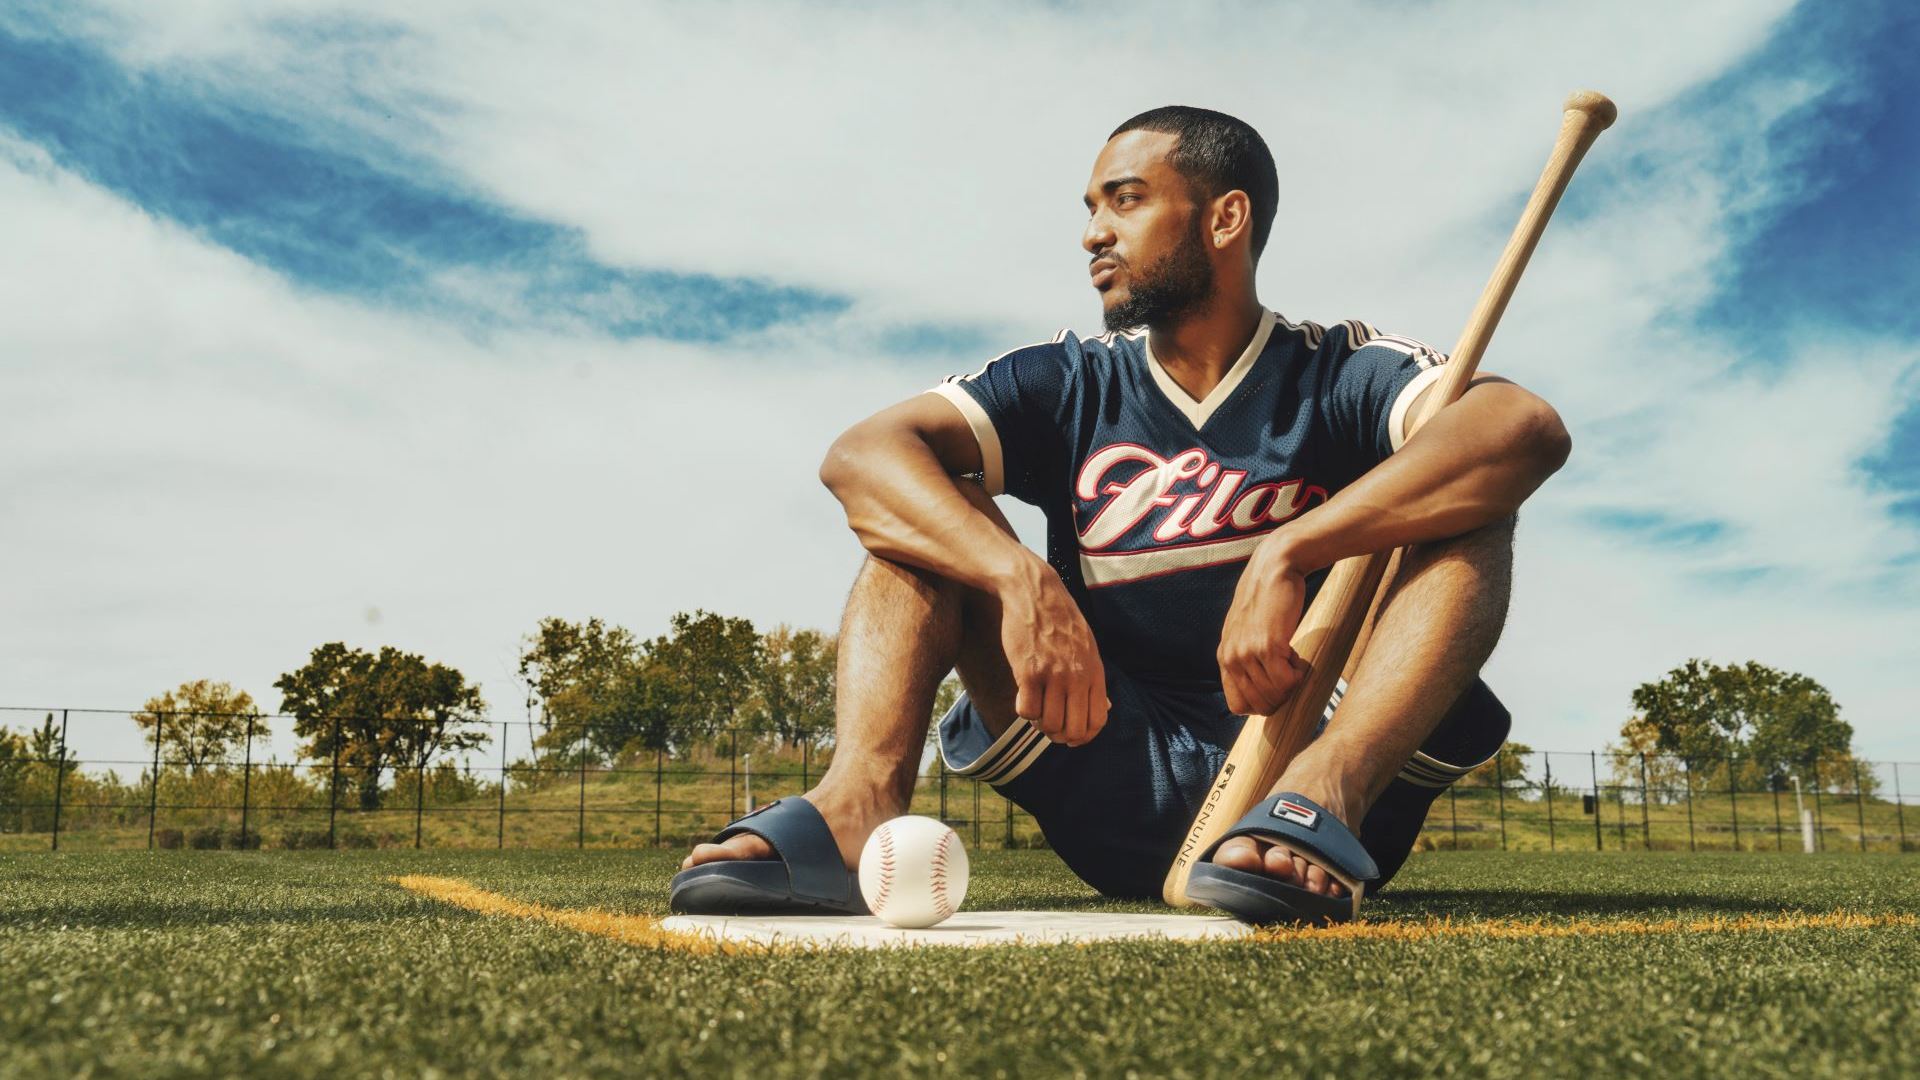 FILA North America Launches Baseball Inspired Collection